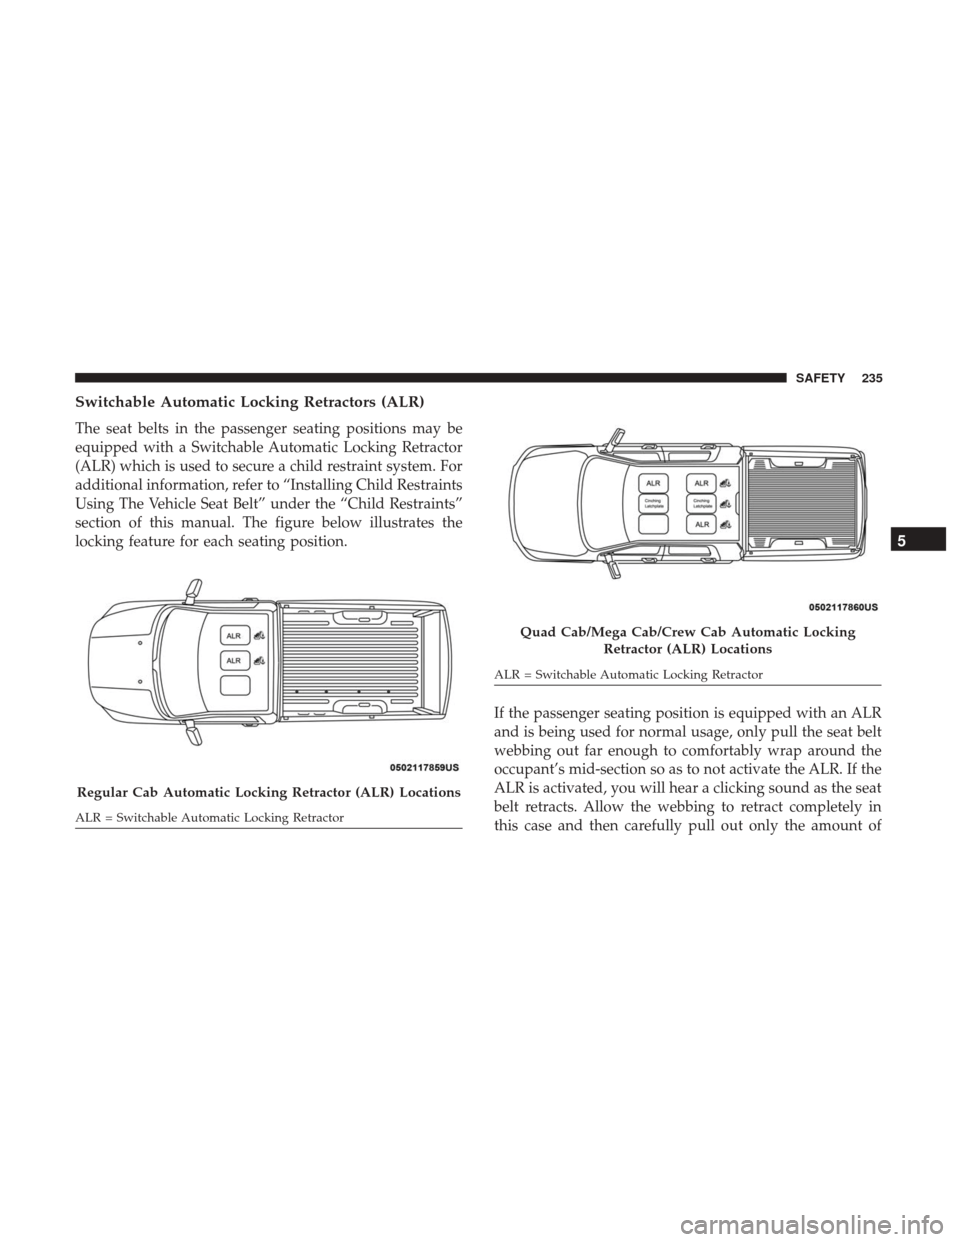 Ram 2500 2018  Owners Manual Switchable Automatic Locking Retractors (ALR)
The seat belts in the passenger seating positions may be
equipped with a Switchable Automatic Locking Retractor
(ALR) which is used to secure a child rest